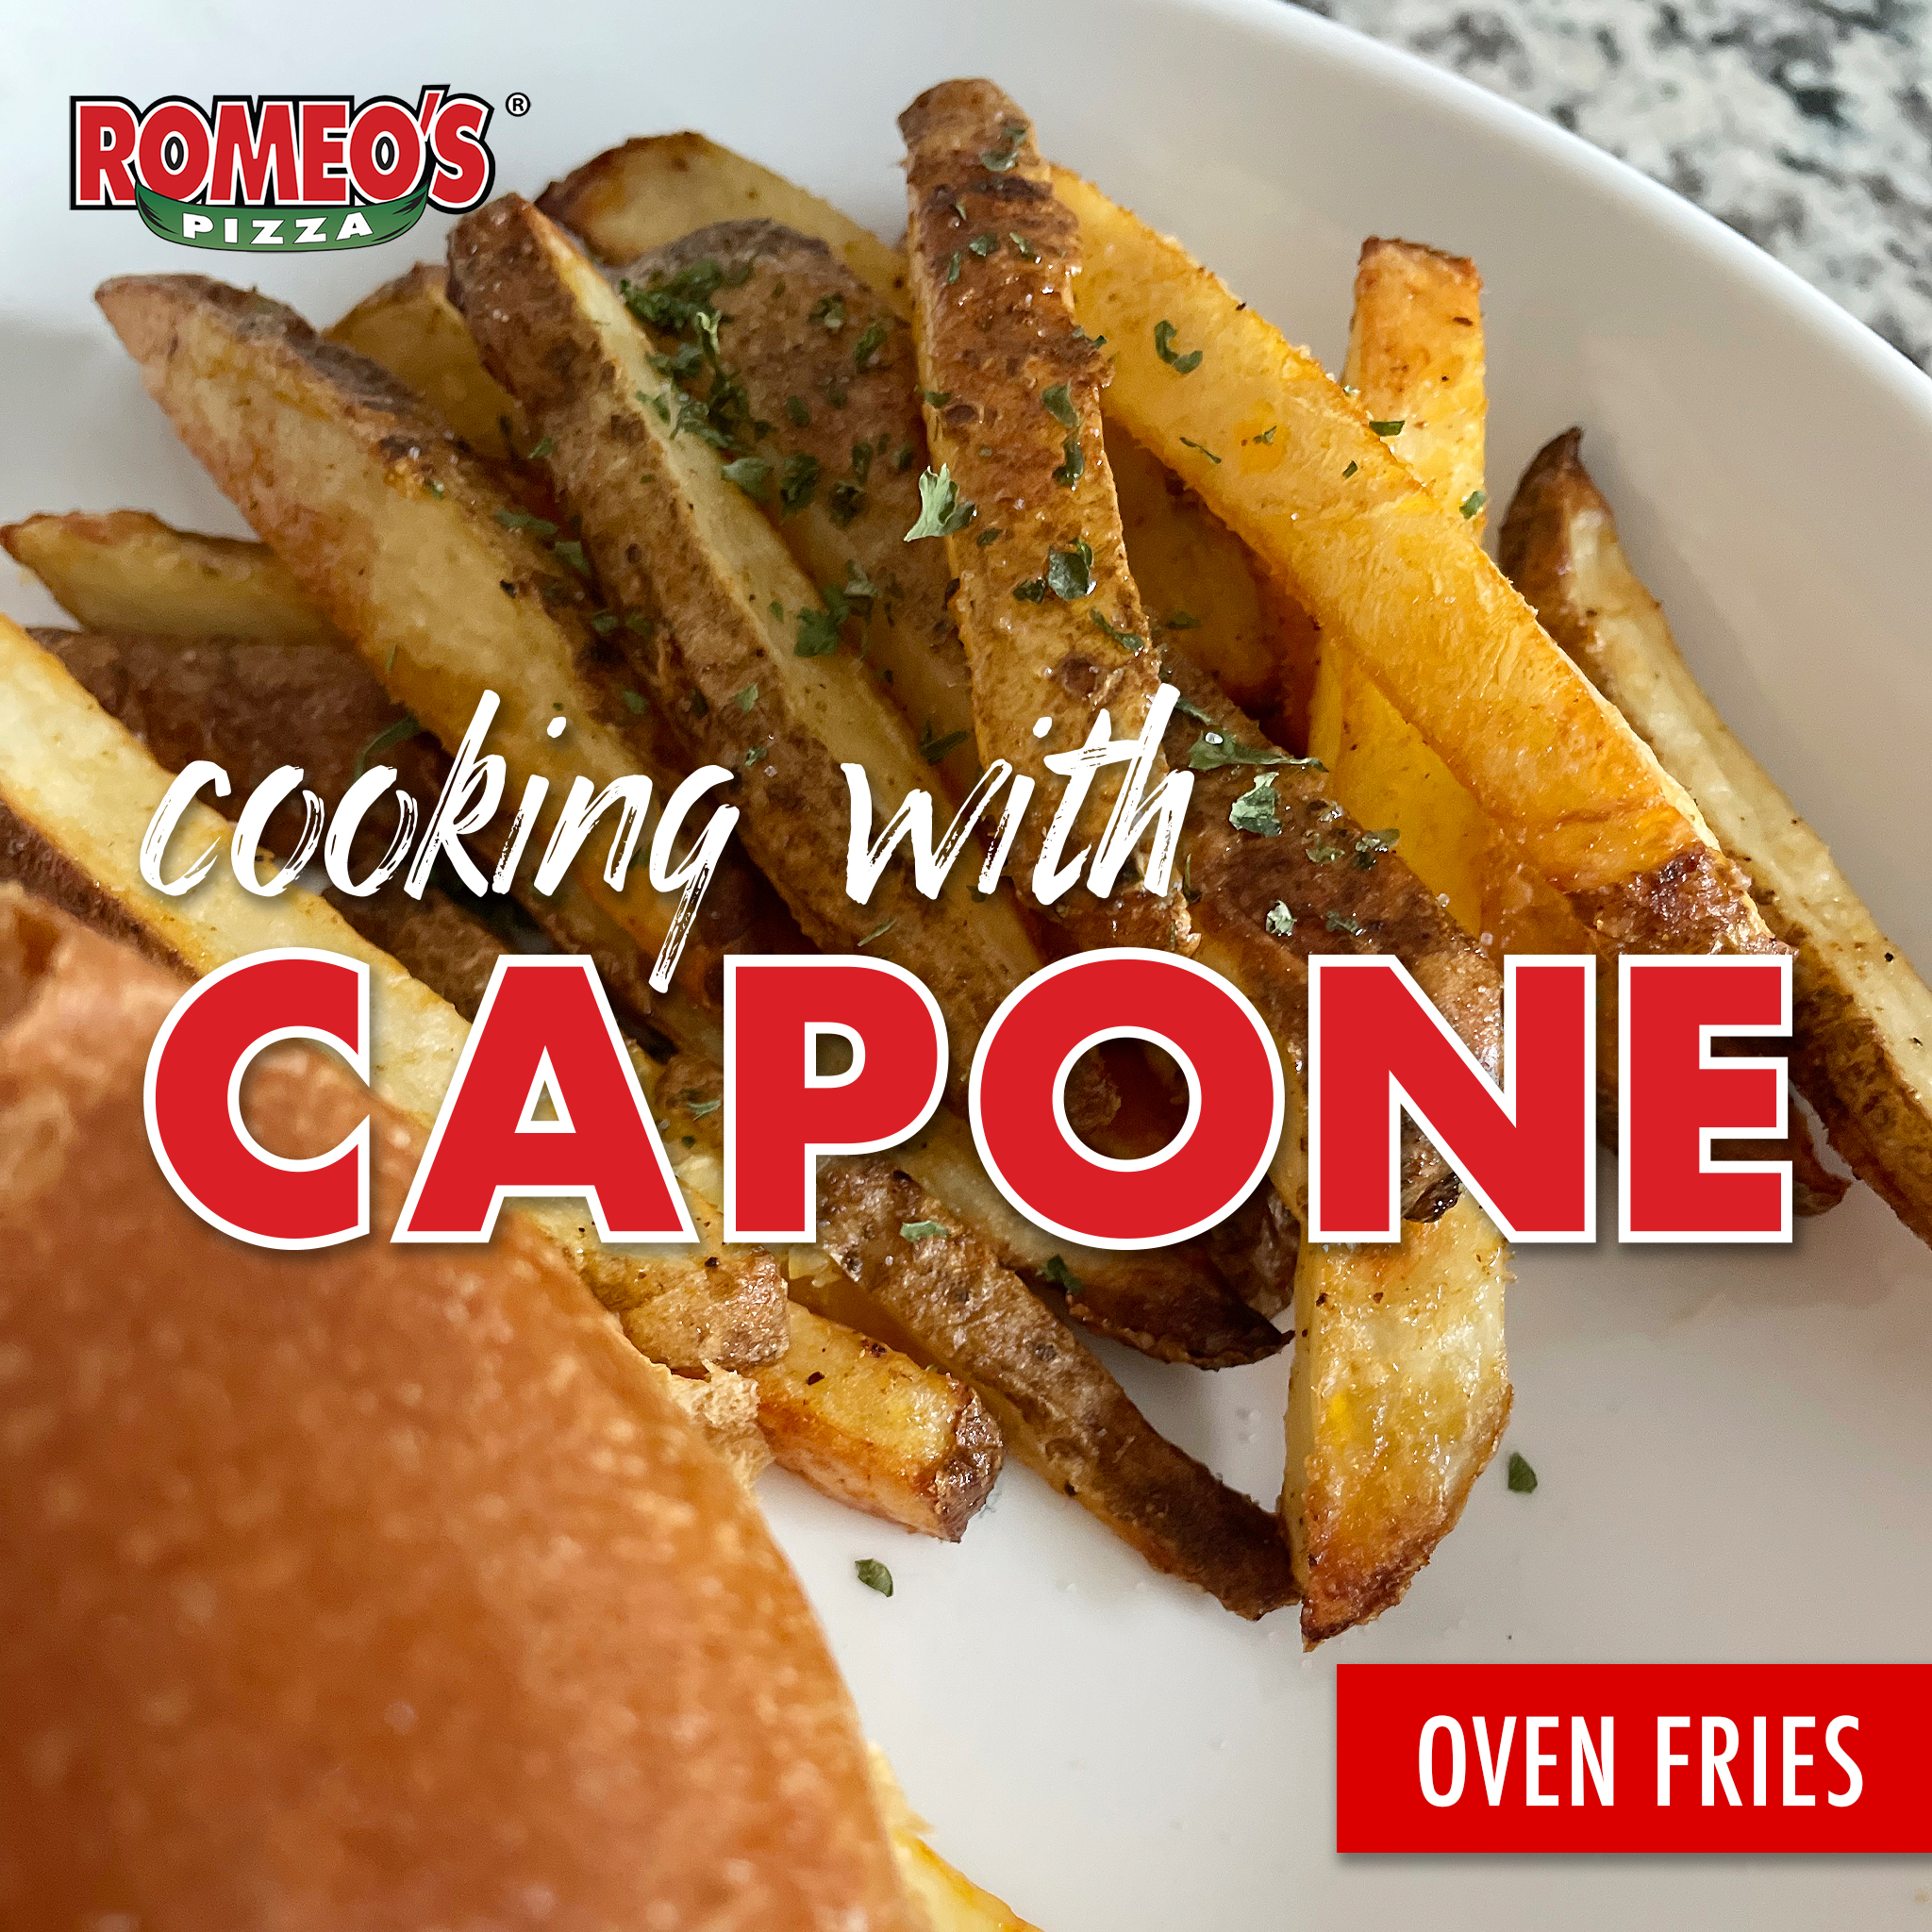 Romeo's Pizza: Cooking With Capone